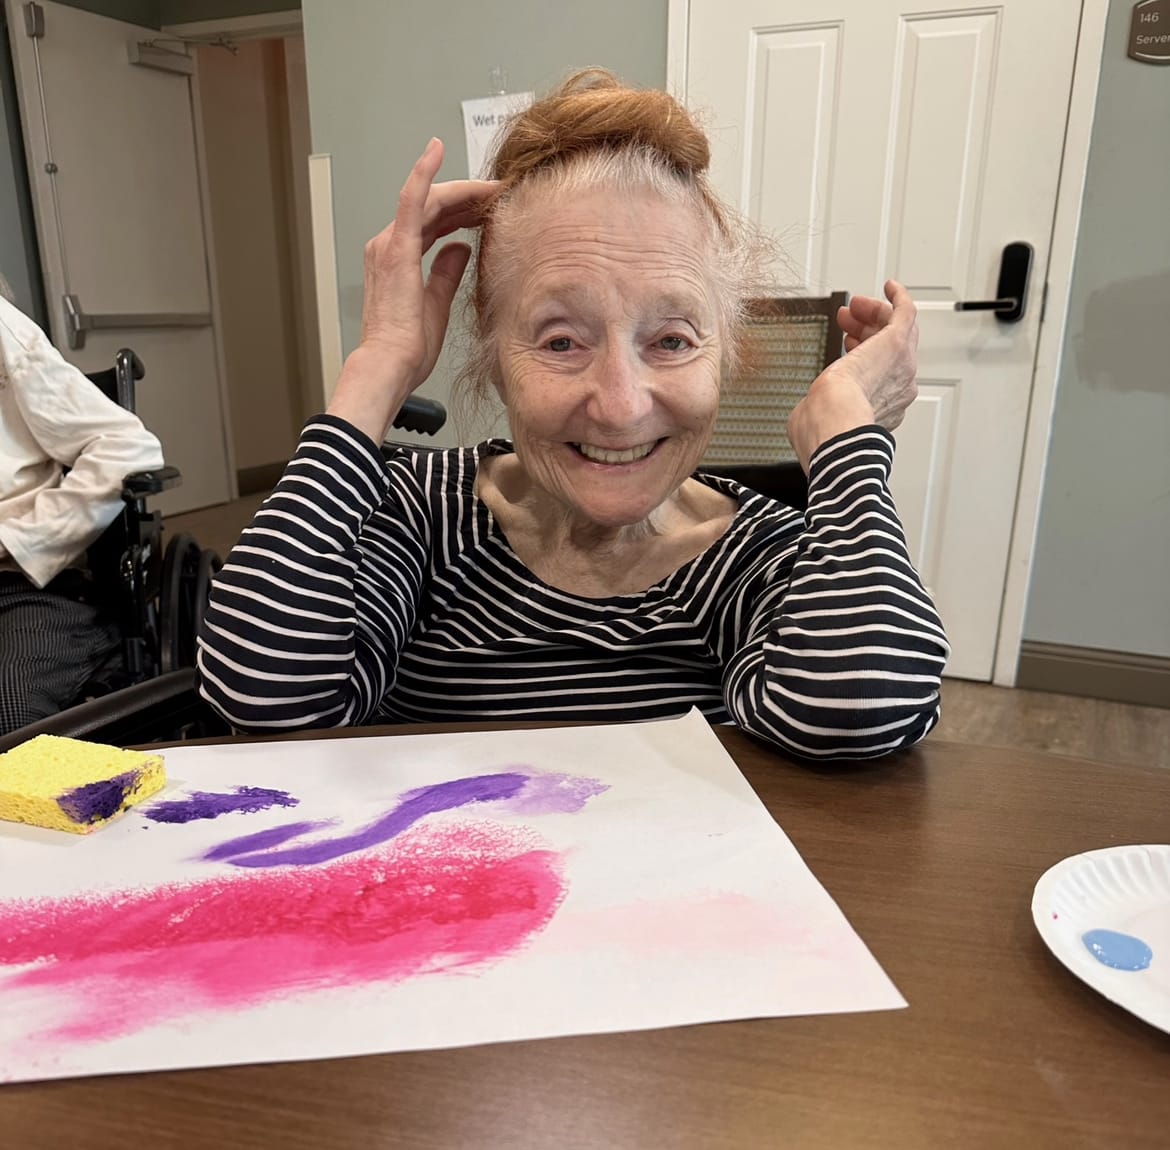 An assisted living resident smiling with artwork in front of her